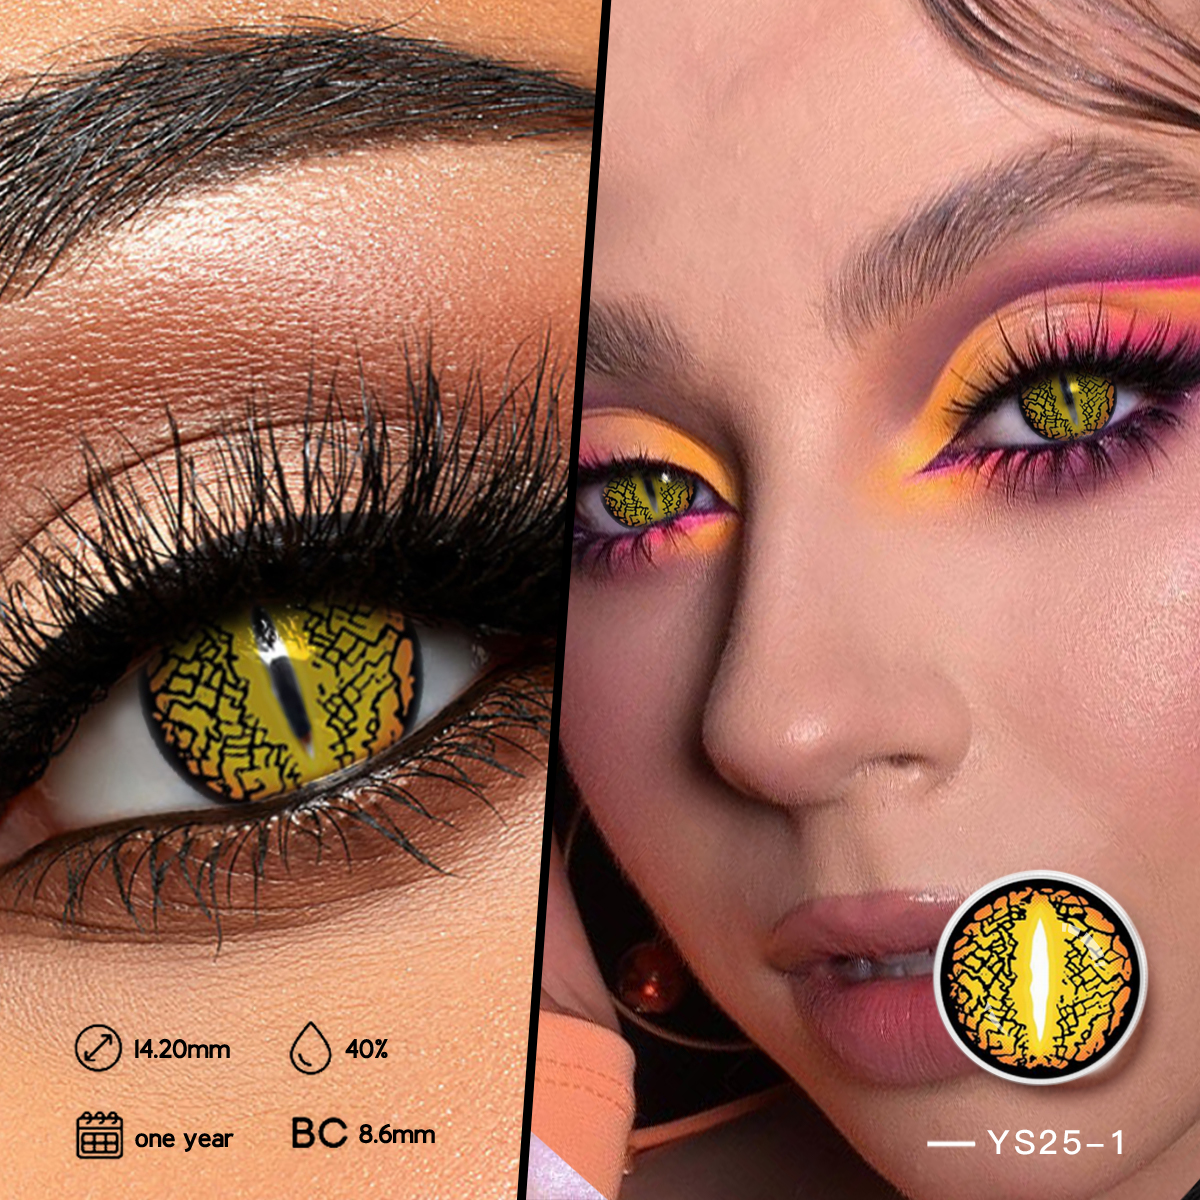 saese 14.5mm New SNAKE EYES yellow Colored Contact Lenses crazy lens halloween color contact lens